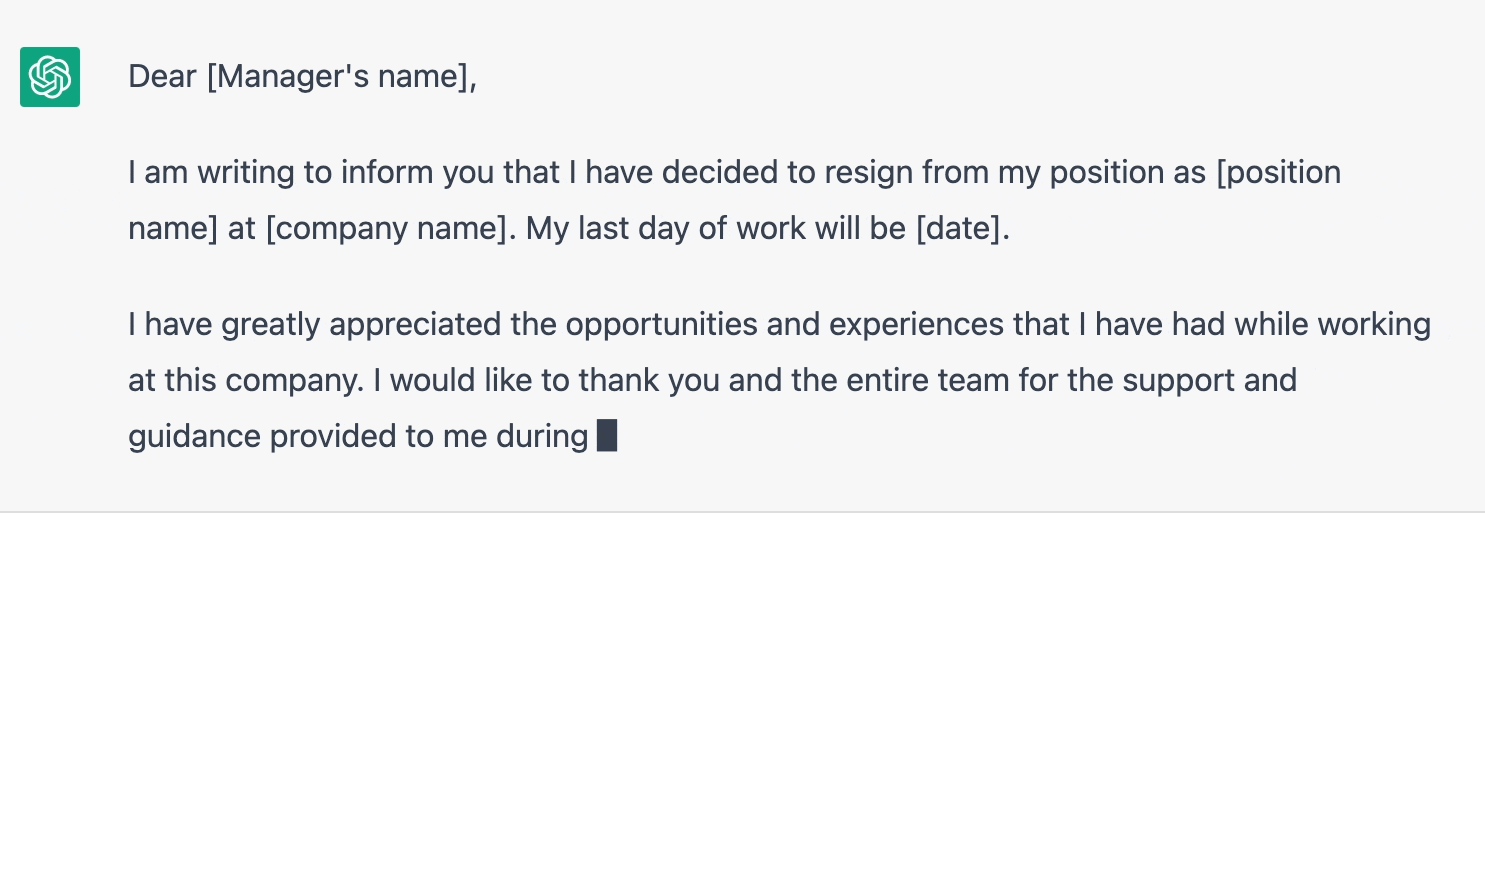 ChatGPT prompt about writing an resignation email